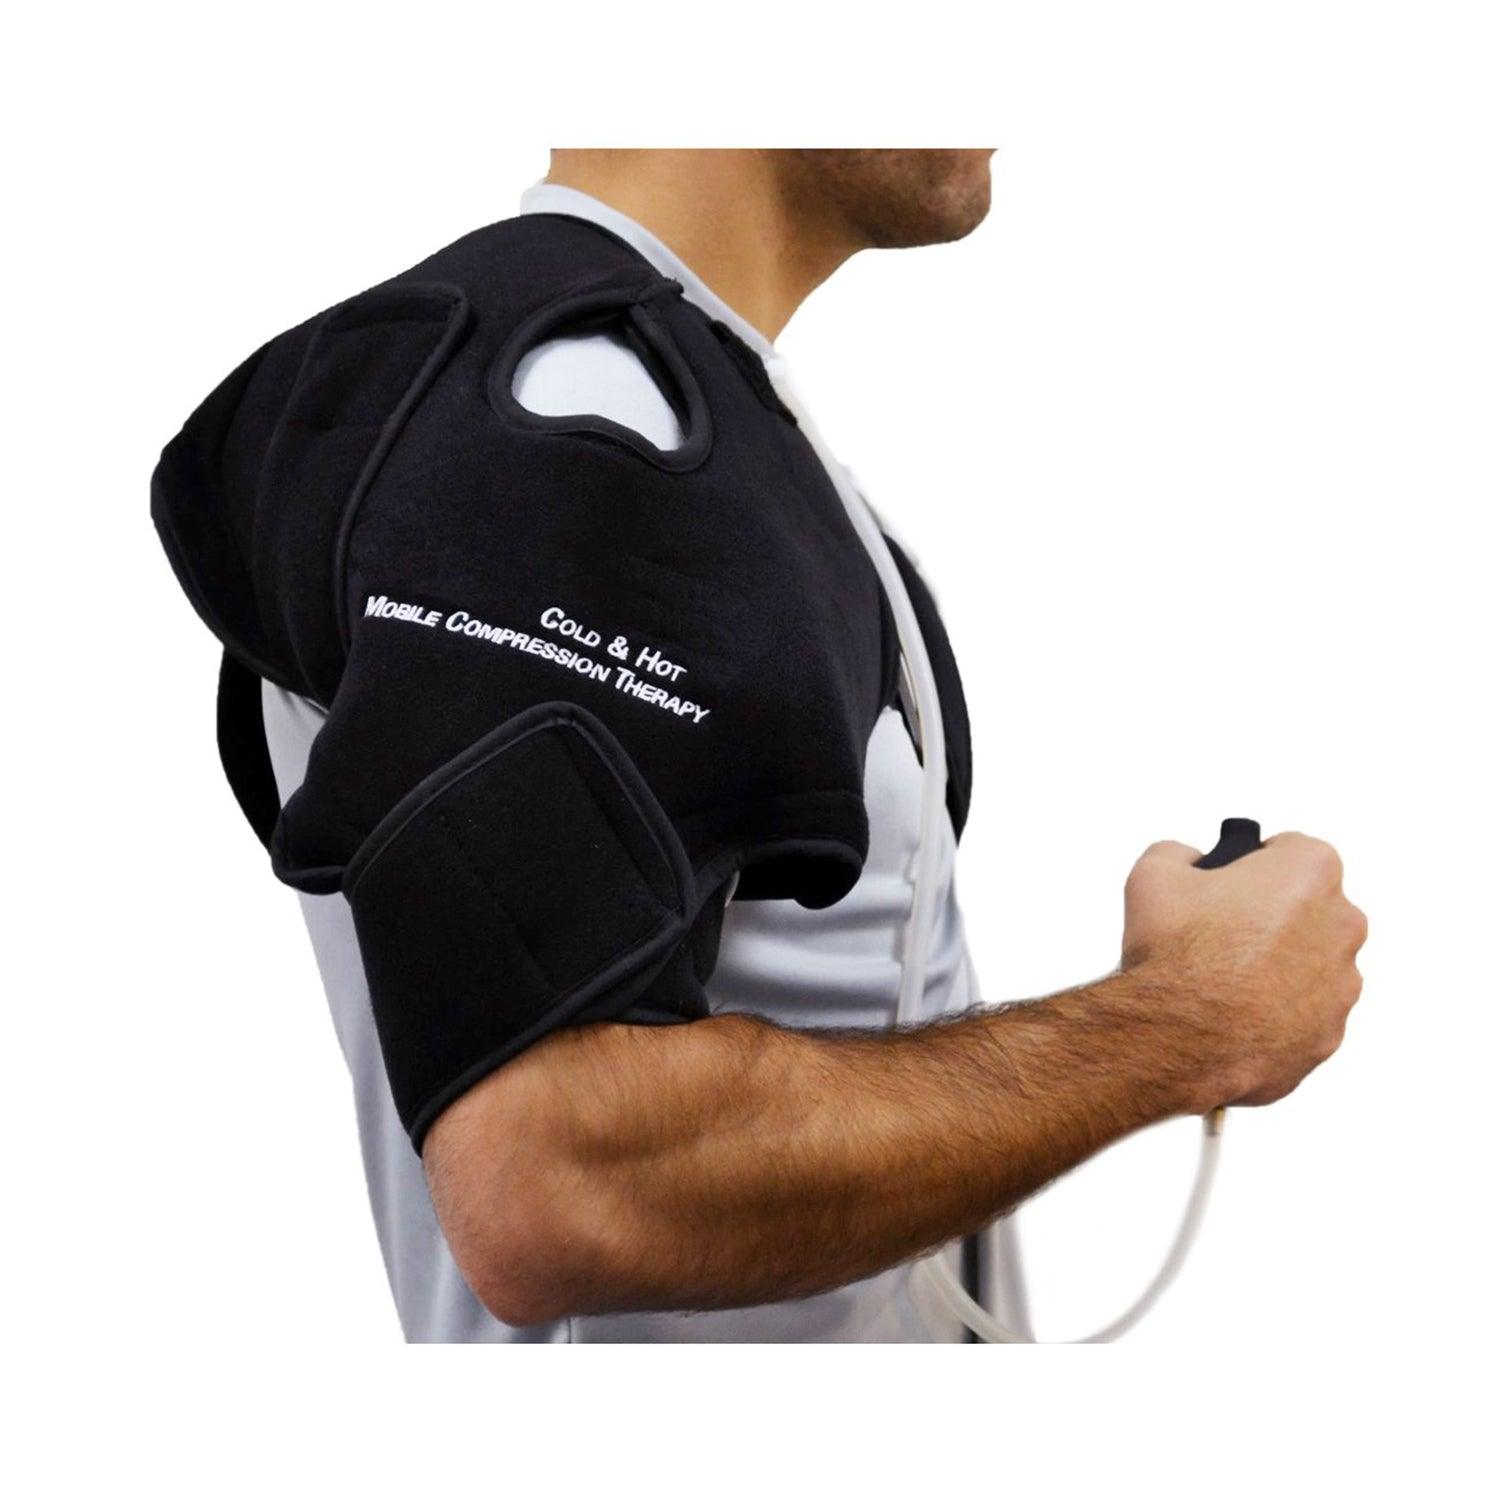 Shoulder brace & support for protection when moving - Colecast